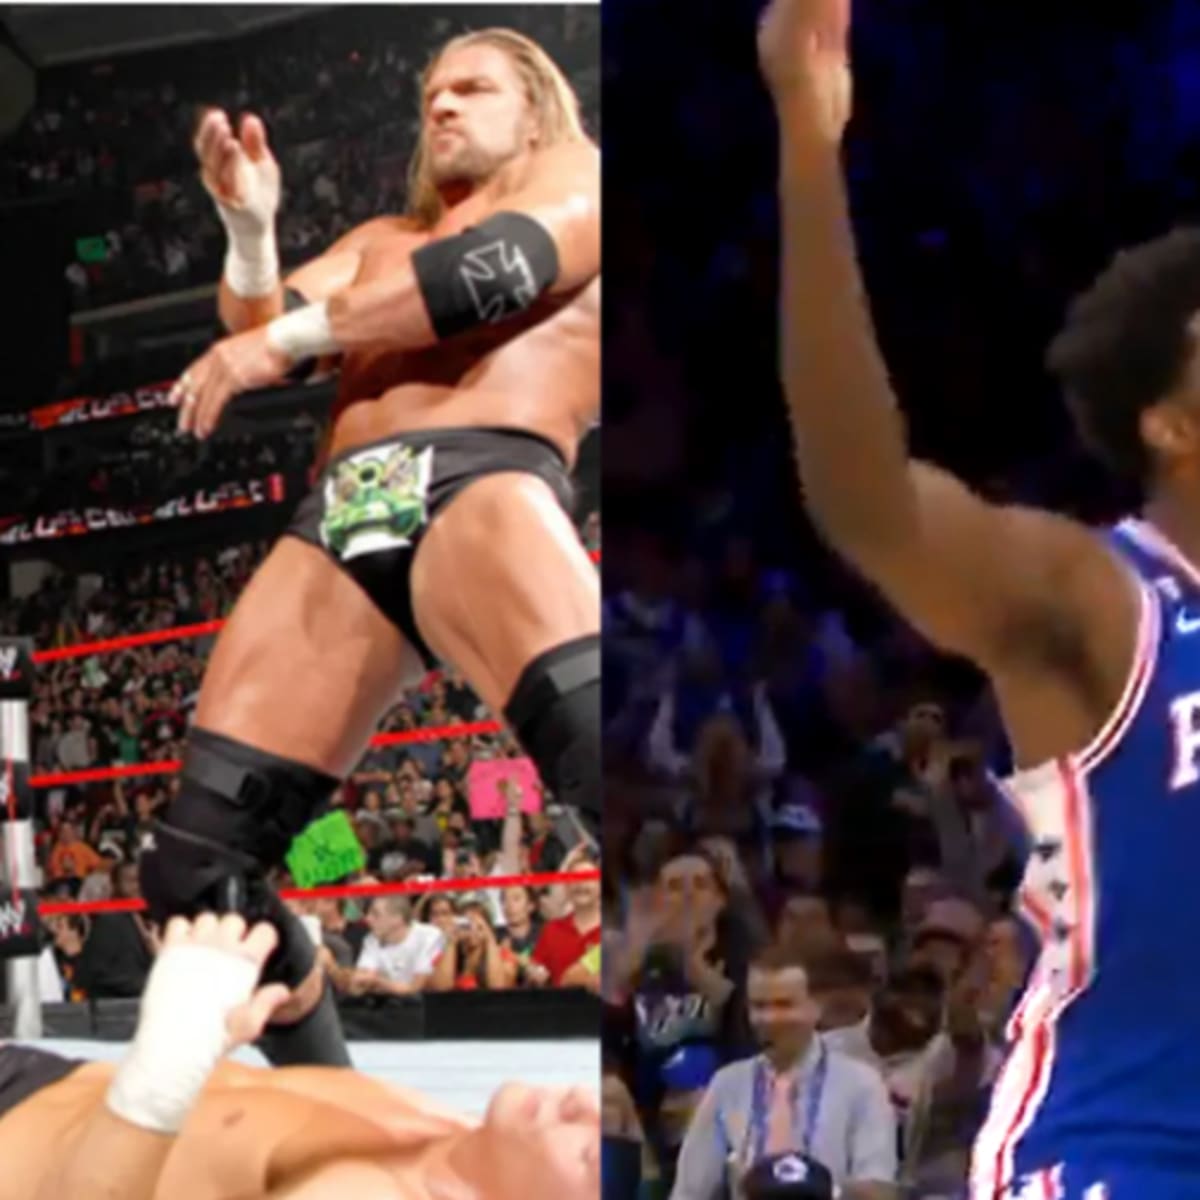 NBA star Joel Embiid fined $25,000 for doing the DX crotch chop